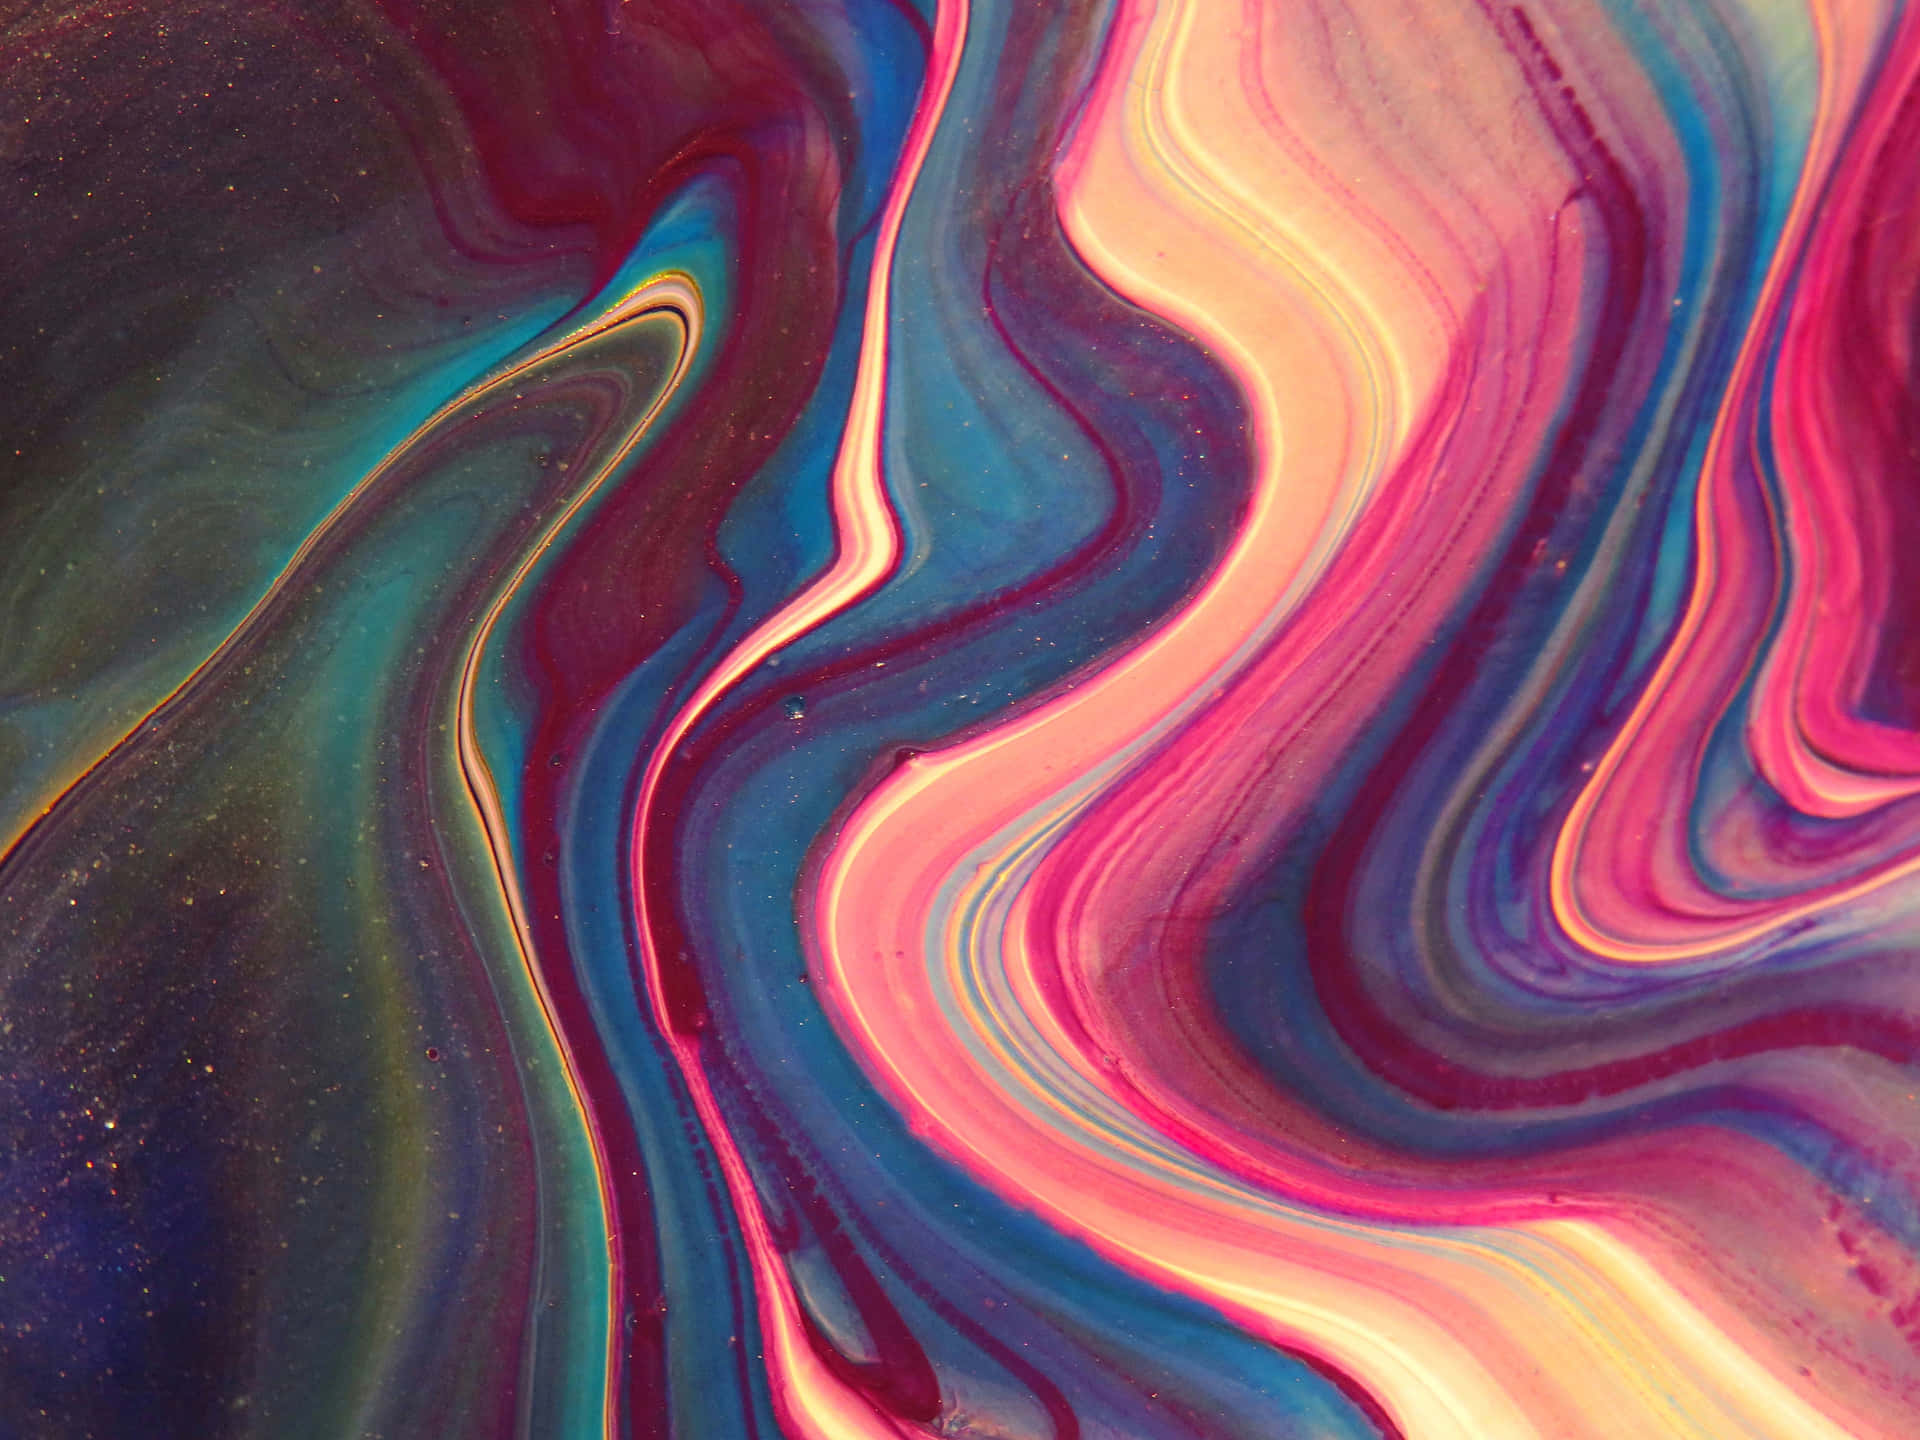 Captivating swirl of colors Wallpaper